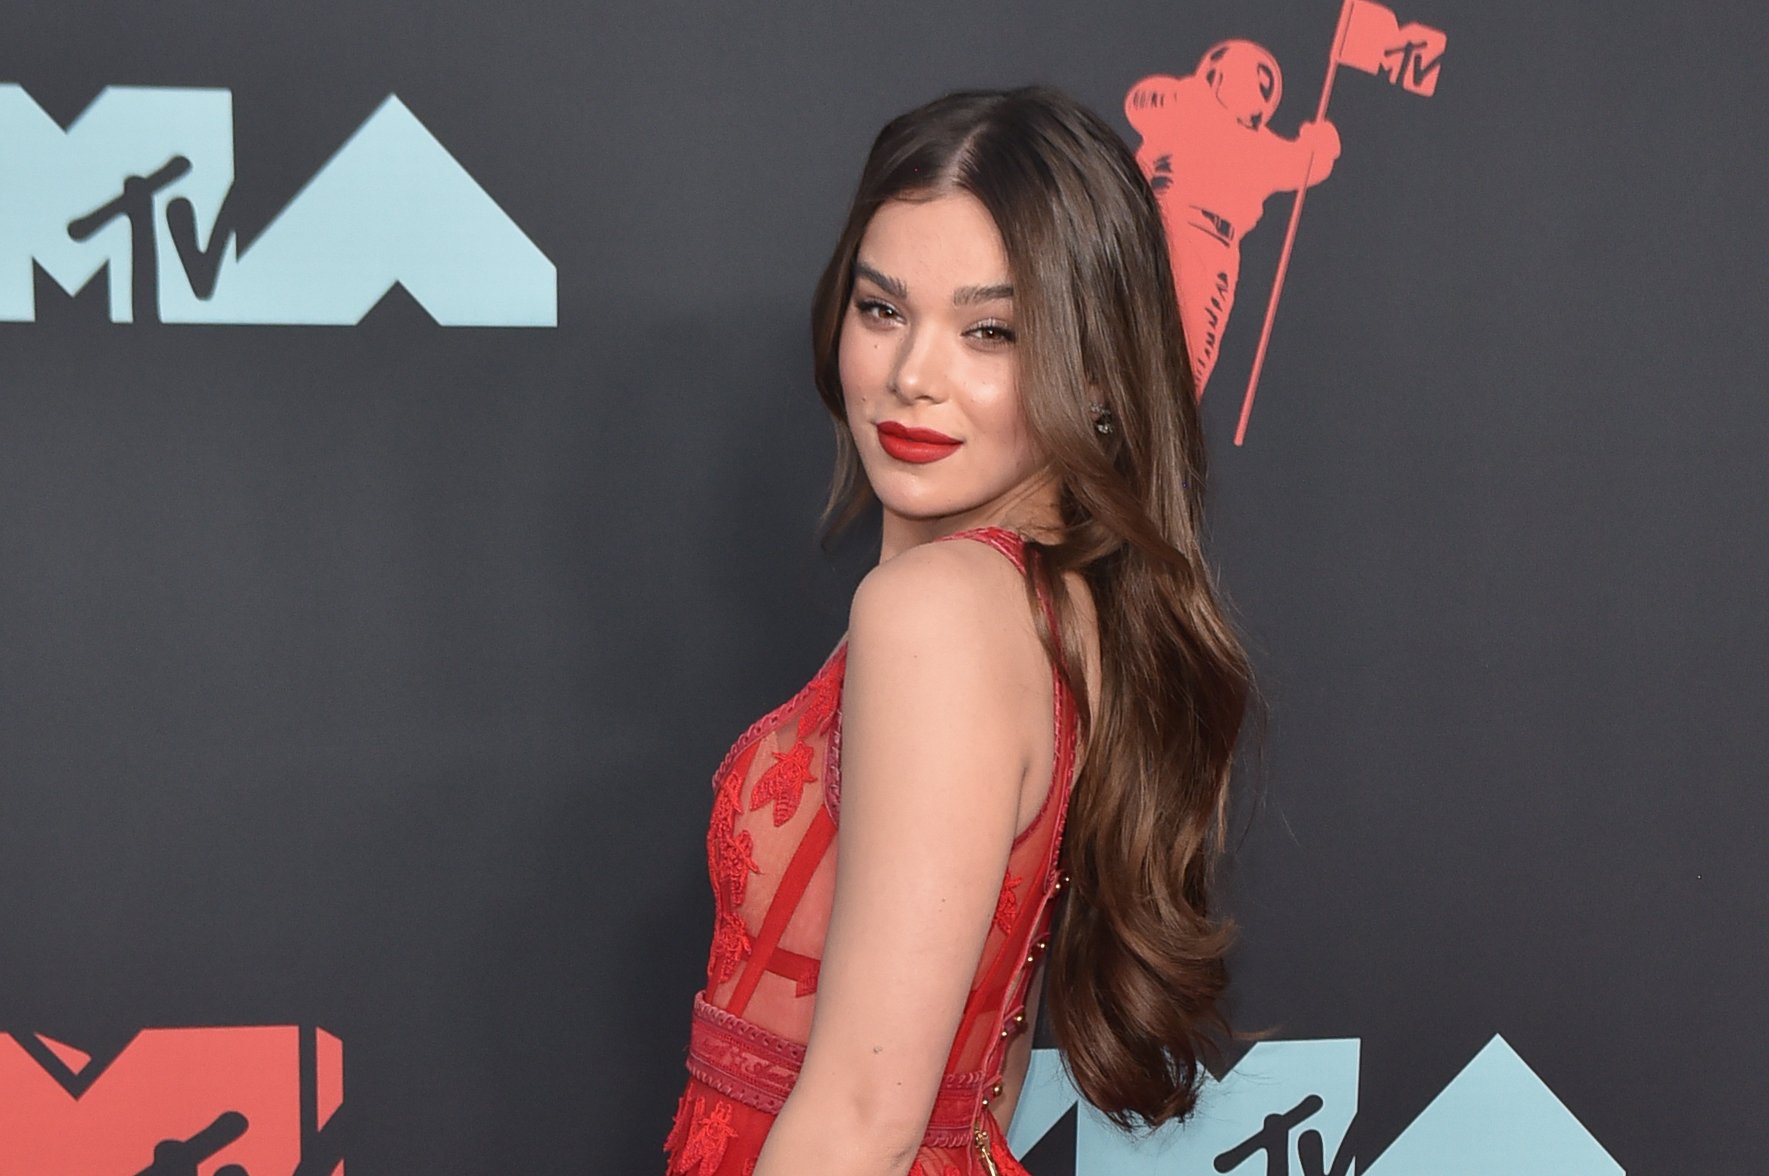 Actress Hailee Steinfeld attends the 2019 MTV Video Music Awards red carpet at Prudential Center on August 26, 2019 in Newark, New Jersey. | Source: Getty Images